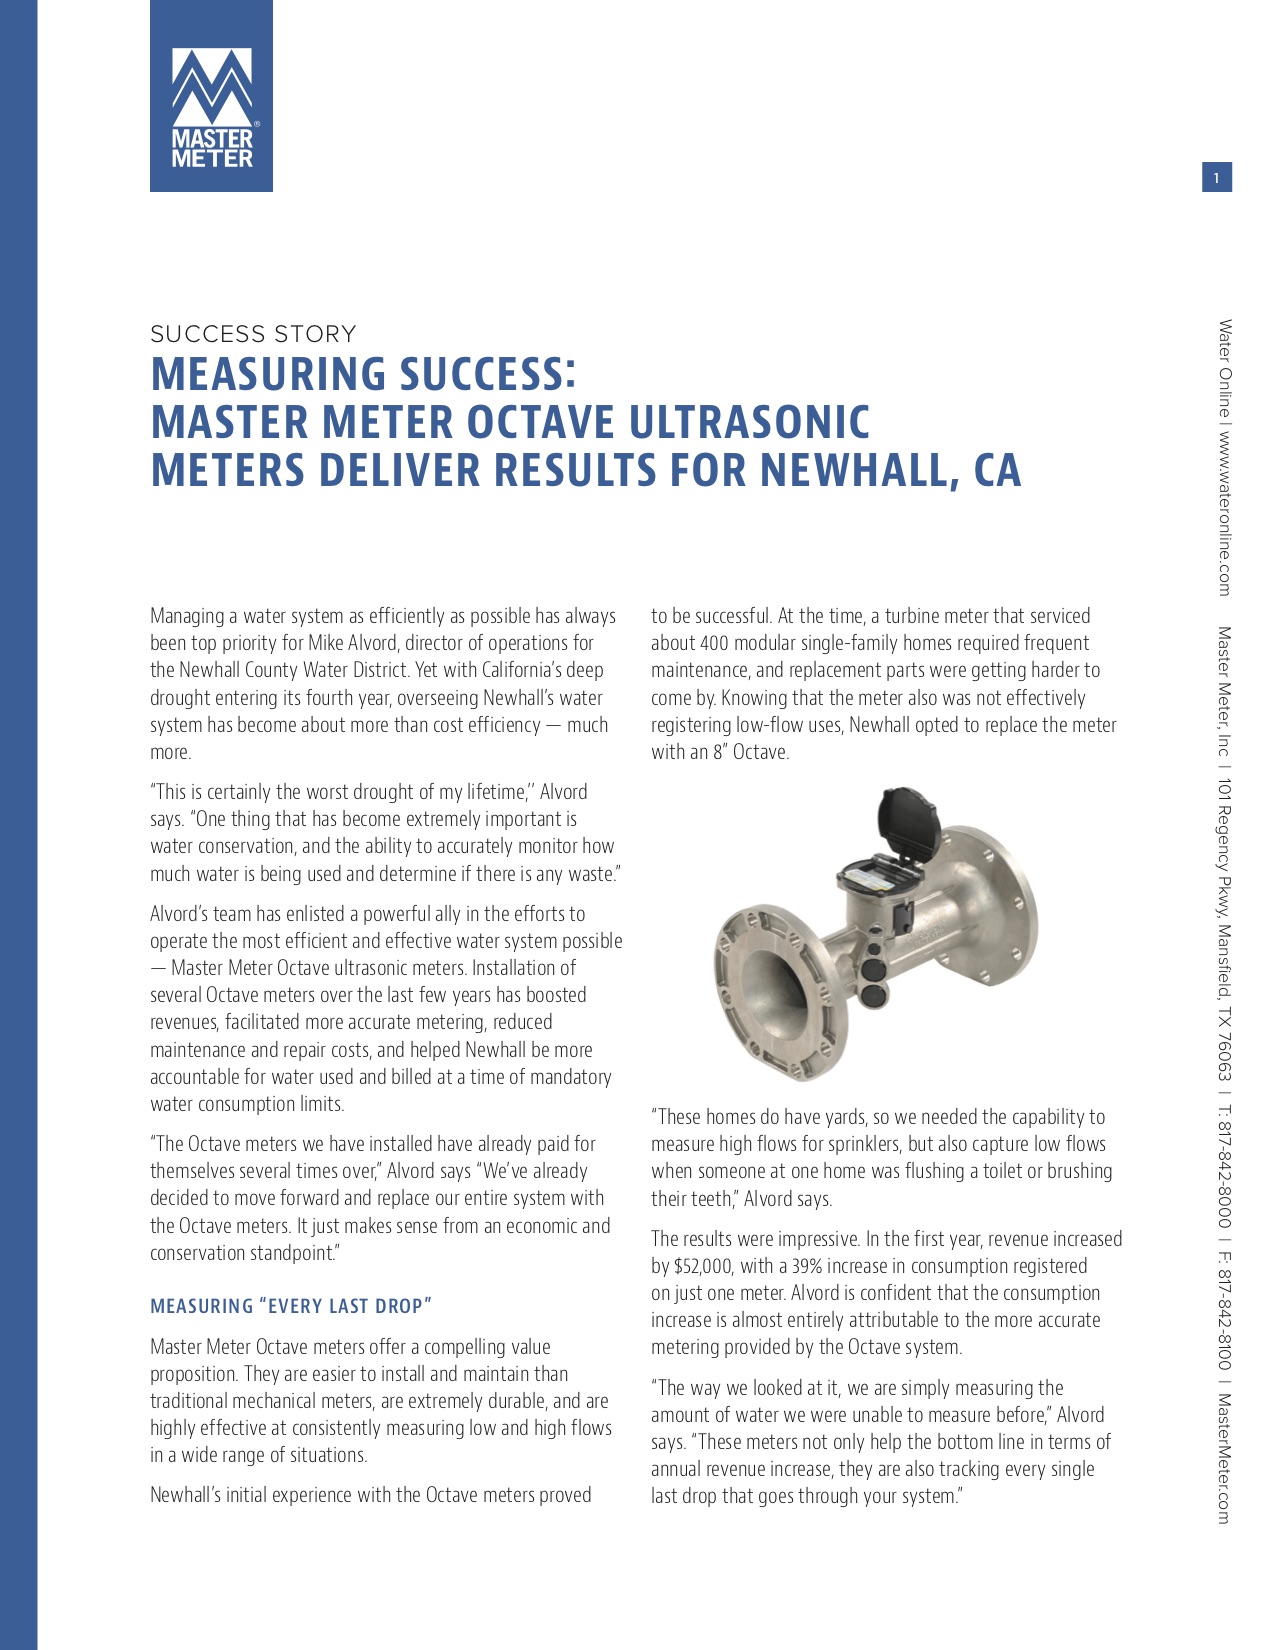 Measuring Success: Master Meter Octave Ultrasonic Meters Deliver Results for Newhall, CA